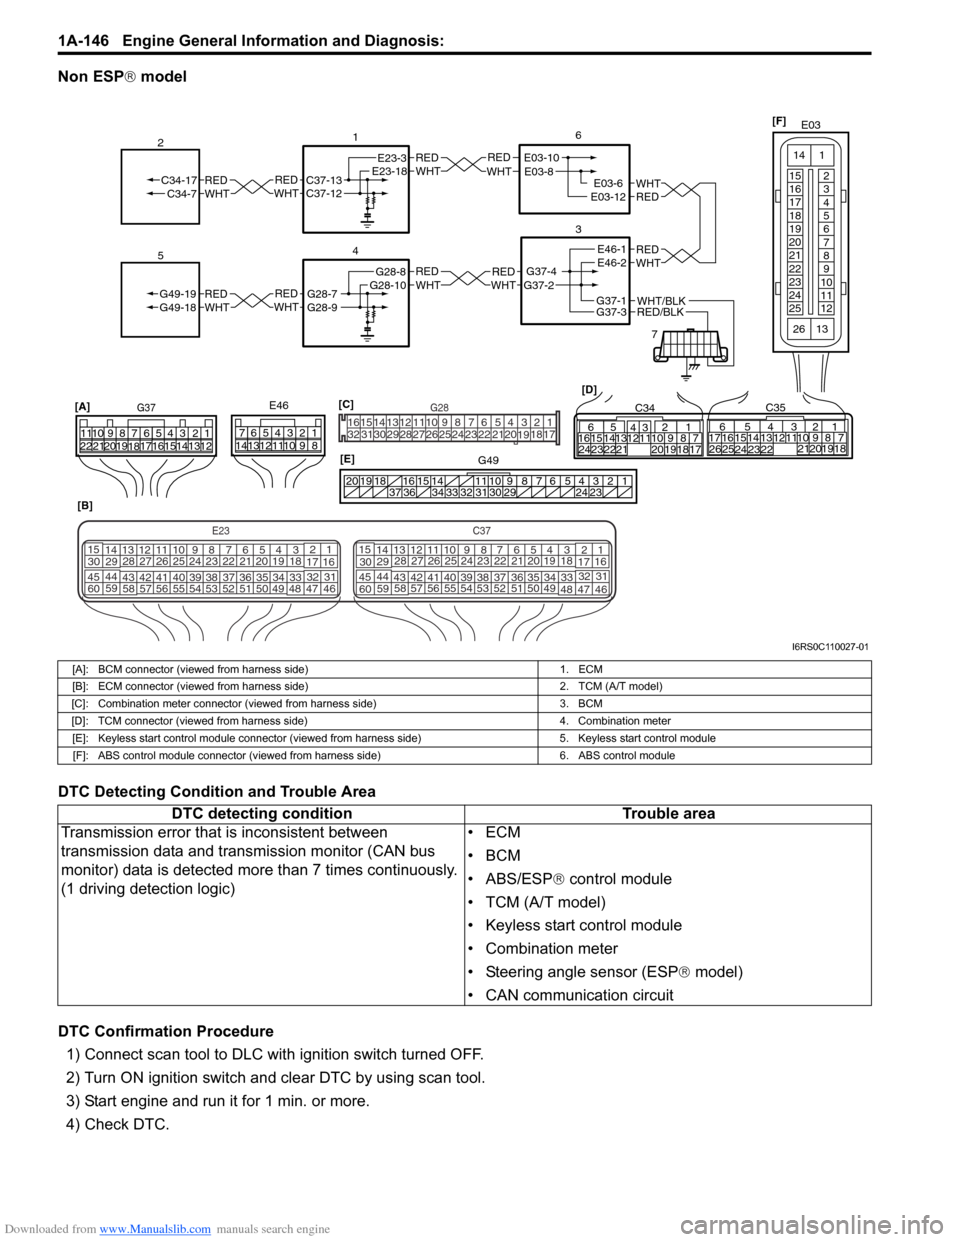 SUZUKI SWIFT 2005 2.G Service Workshop Manual Downloaded from www.Manualslib.com manuals search engine 1A-146 Engine General Information and Diagnosis: 
Non ESP® model
DTC Detecting Condition and Trouble Area
DTC Confirmation Procedure 1) Connec